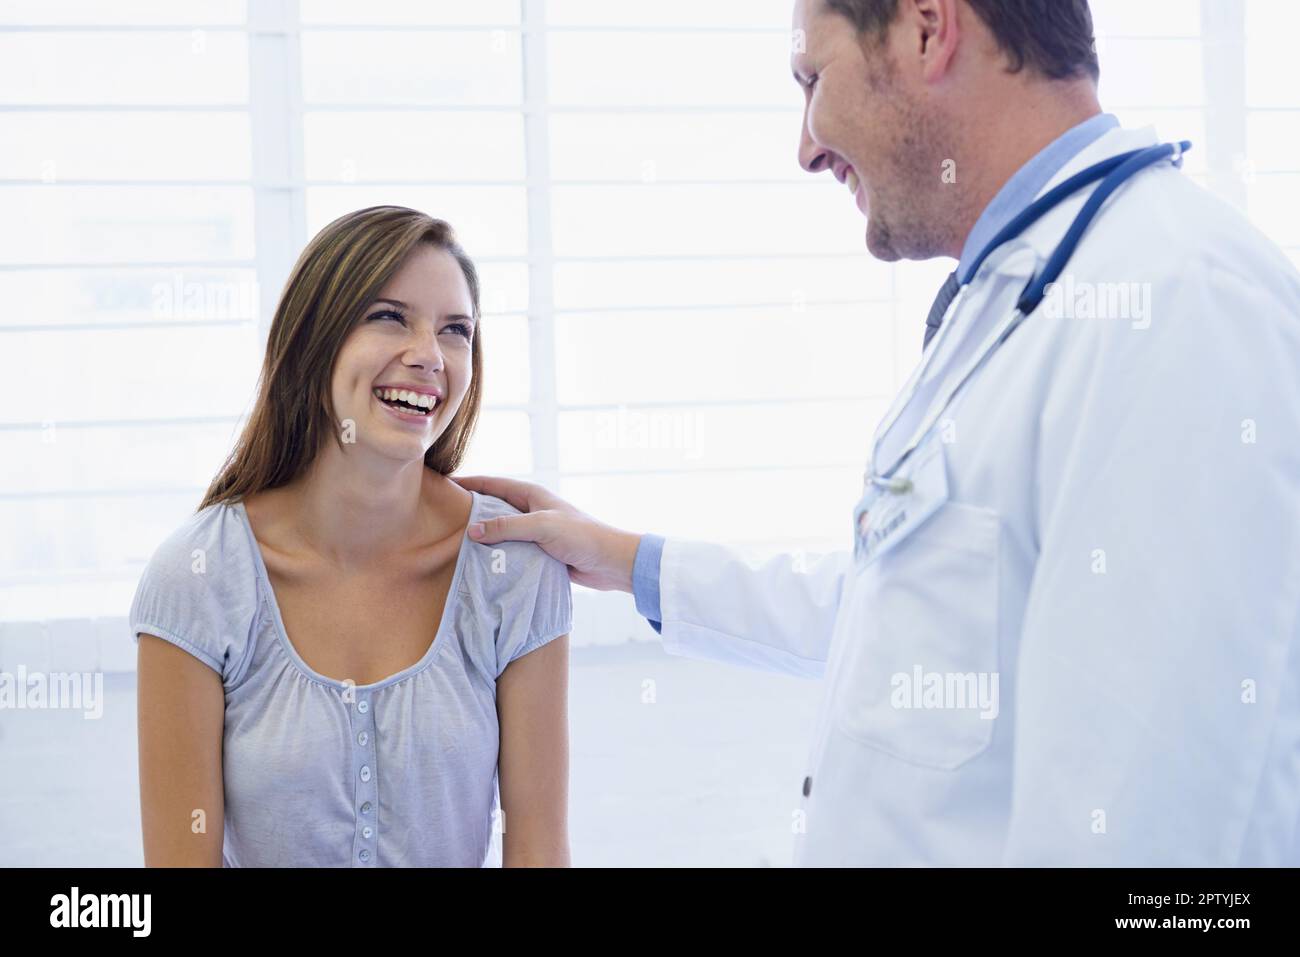 Youre in excellent health. A young woman looking relieved during a visit to the doctor Stock Photo